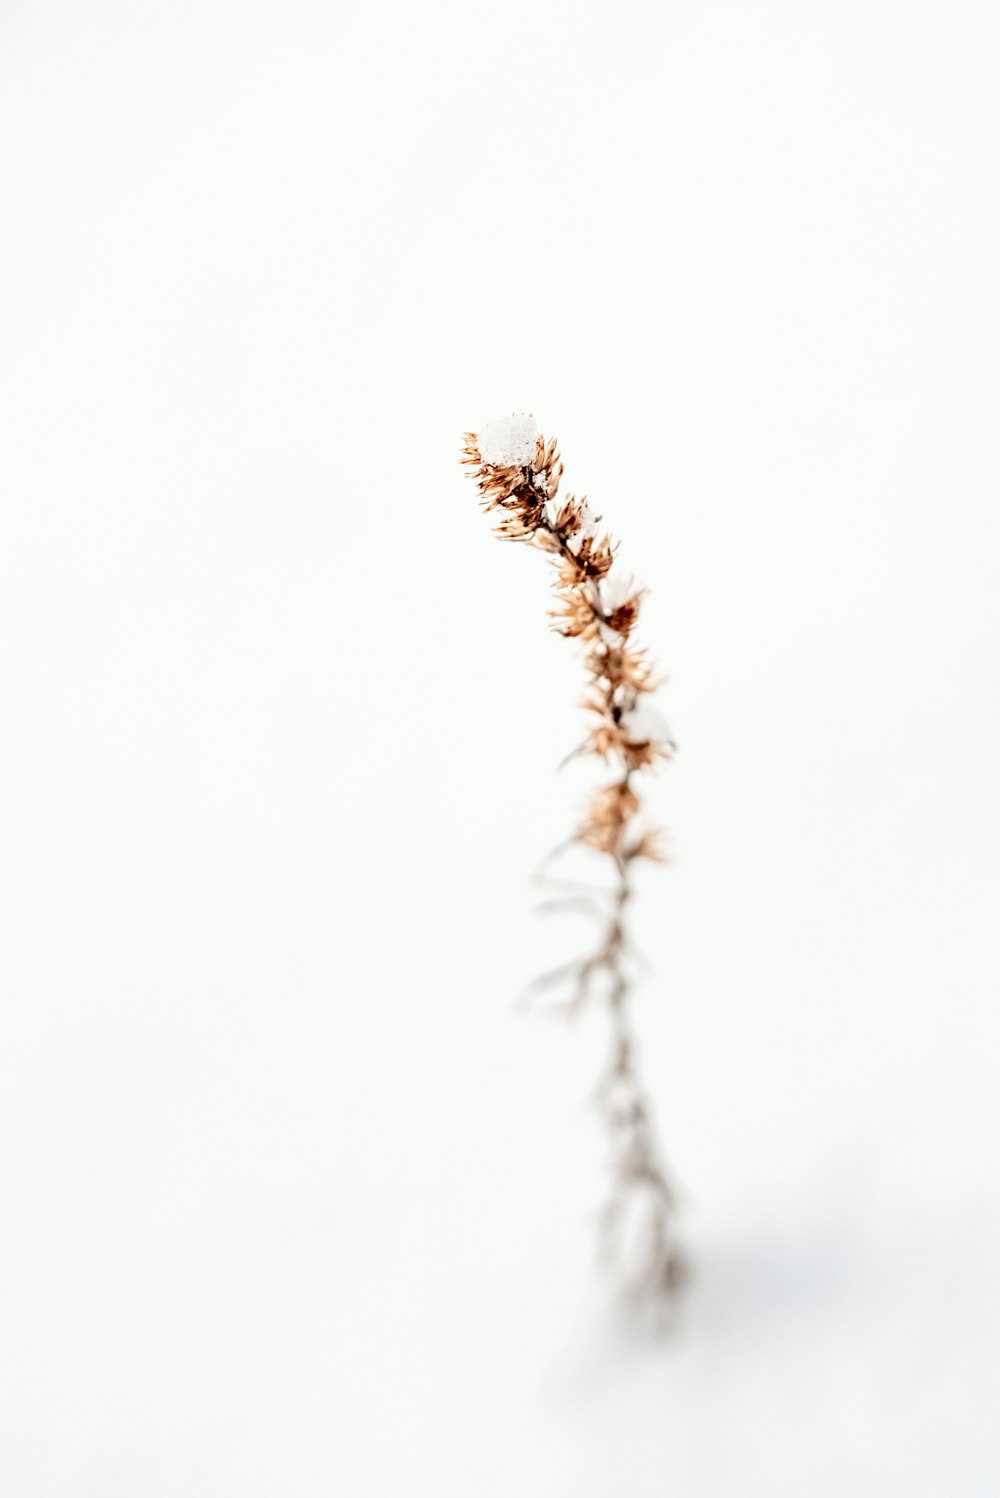 a small plant is shown in the middle of a white background